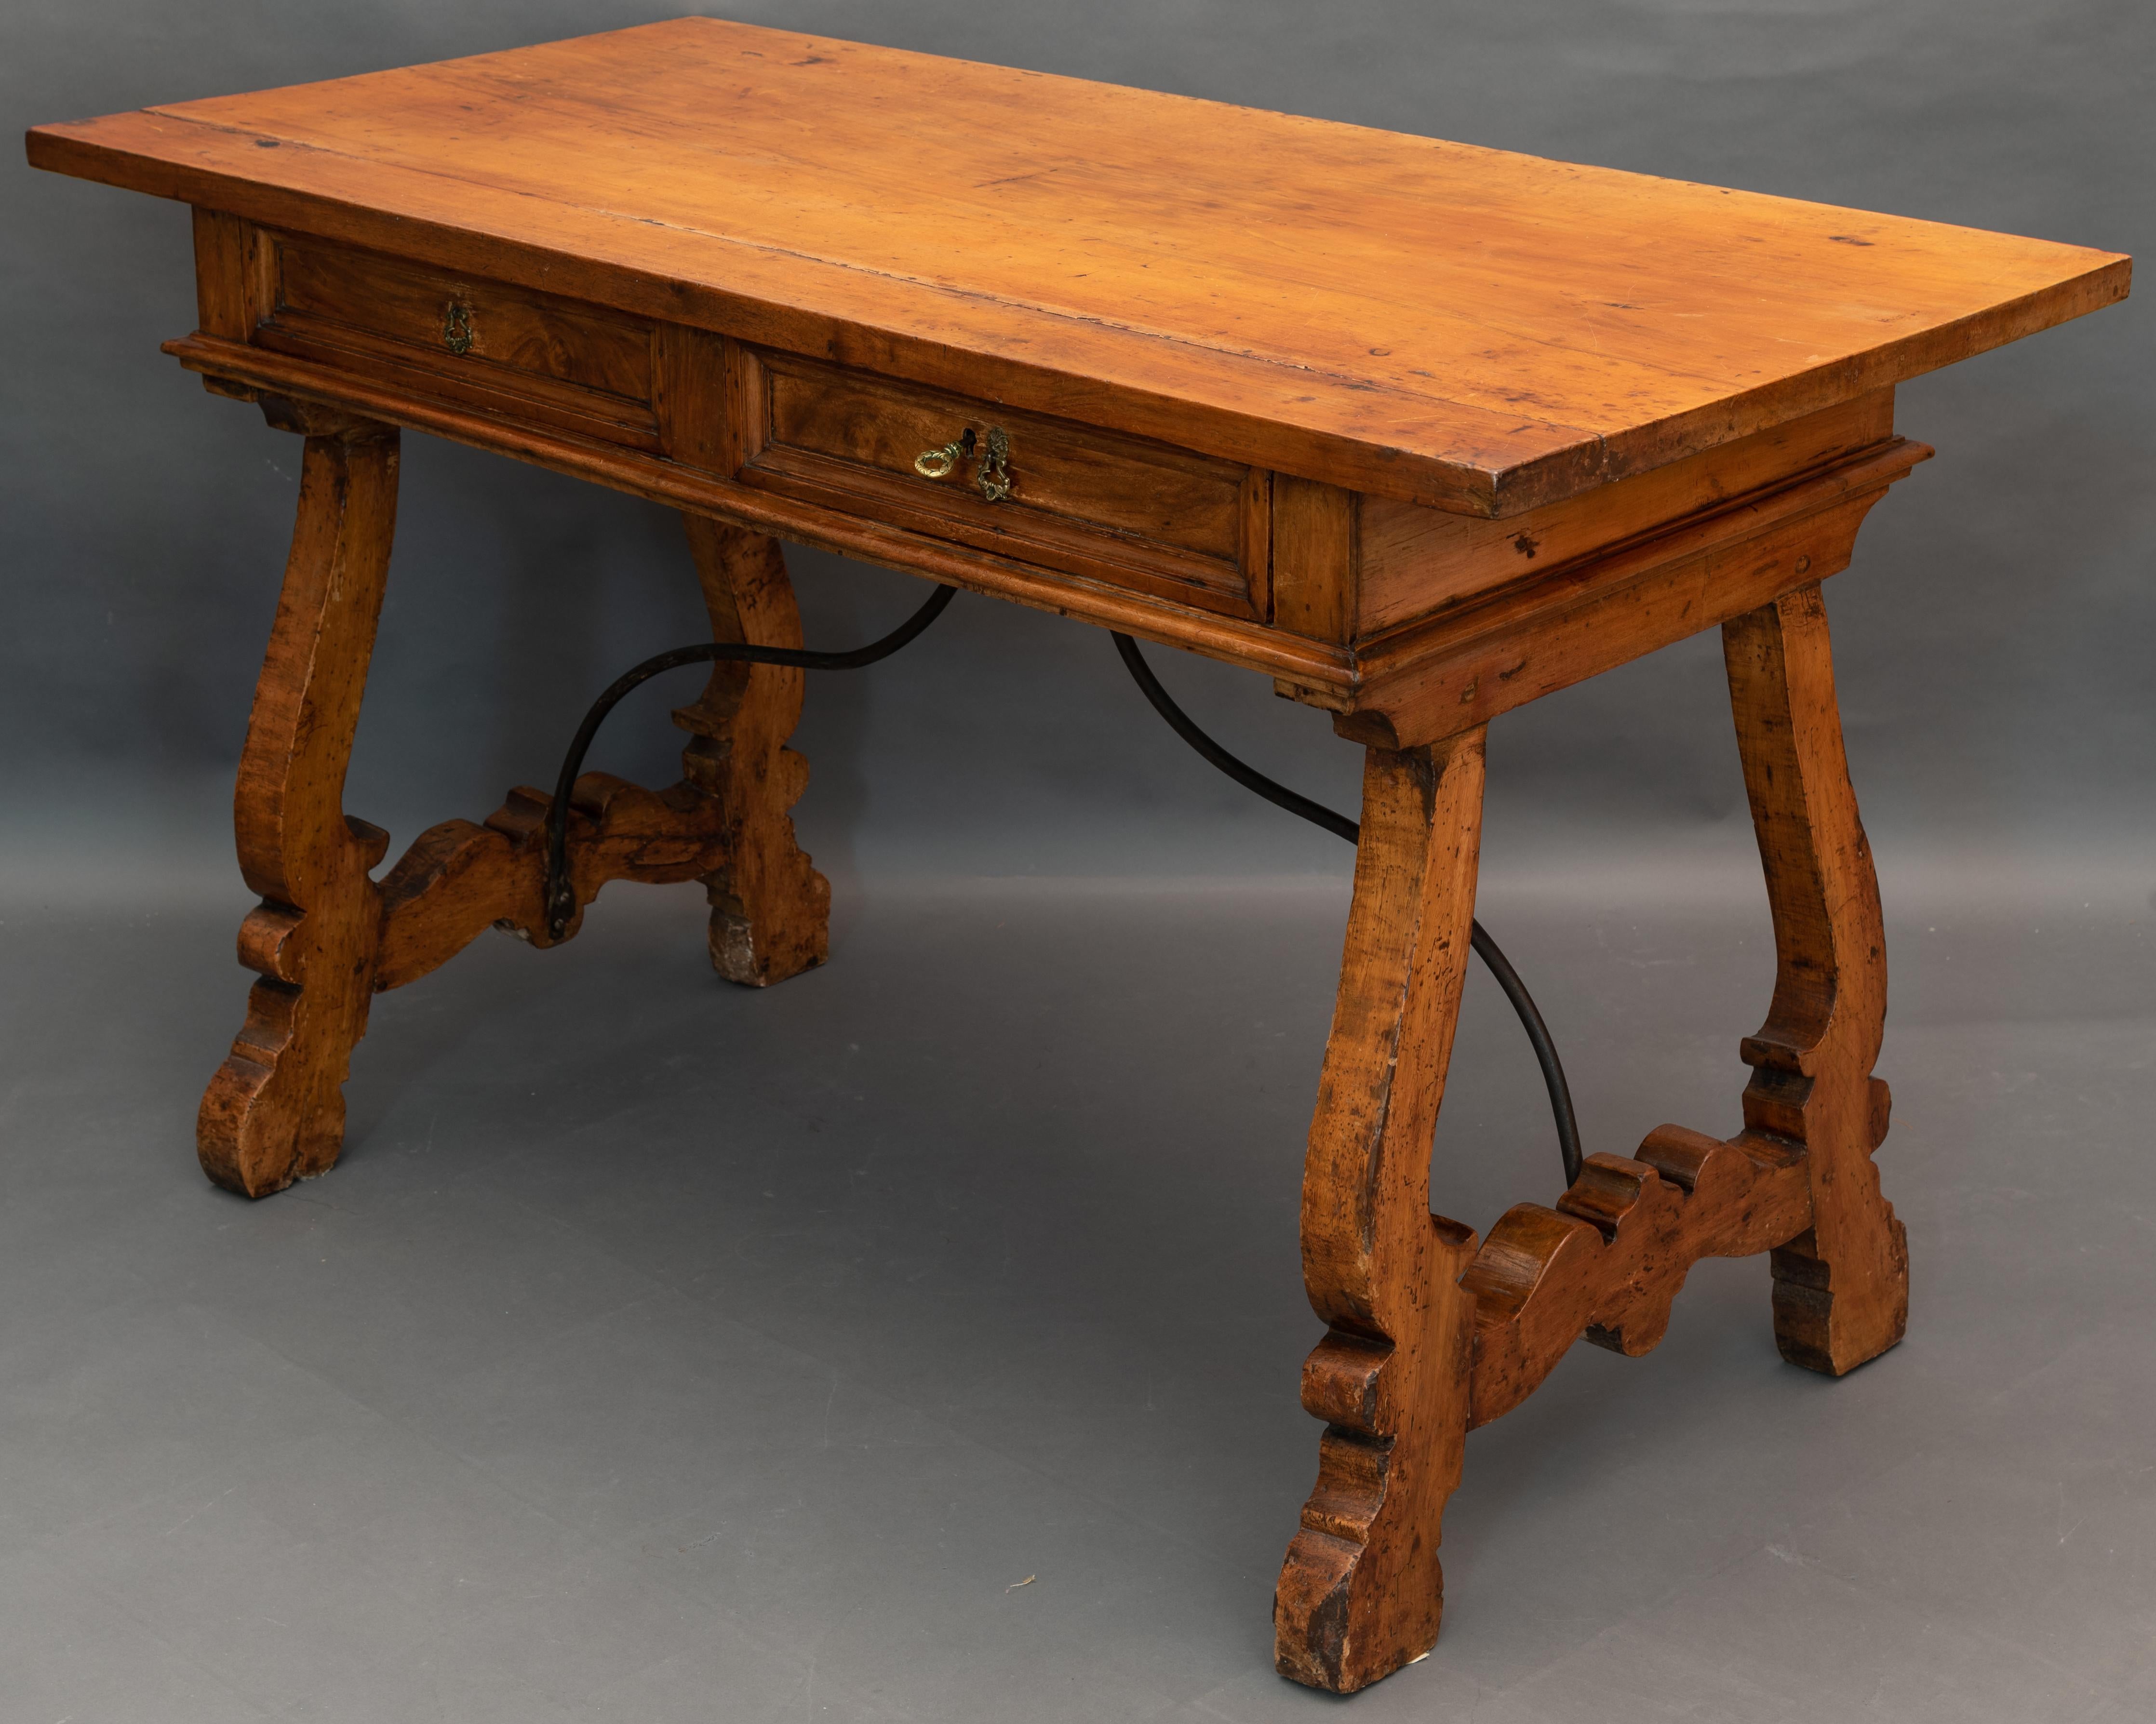 Refectory table in Tuscan walnut with rectangular top with two drawers in a row. 
The table is on lovely lyre legs united by a curved wrought iron fitting. 
There is a key and each drawer has a different style lock. 

All made from solid